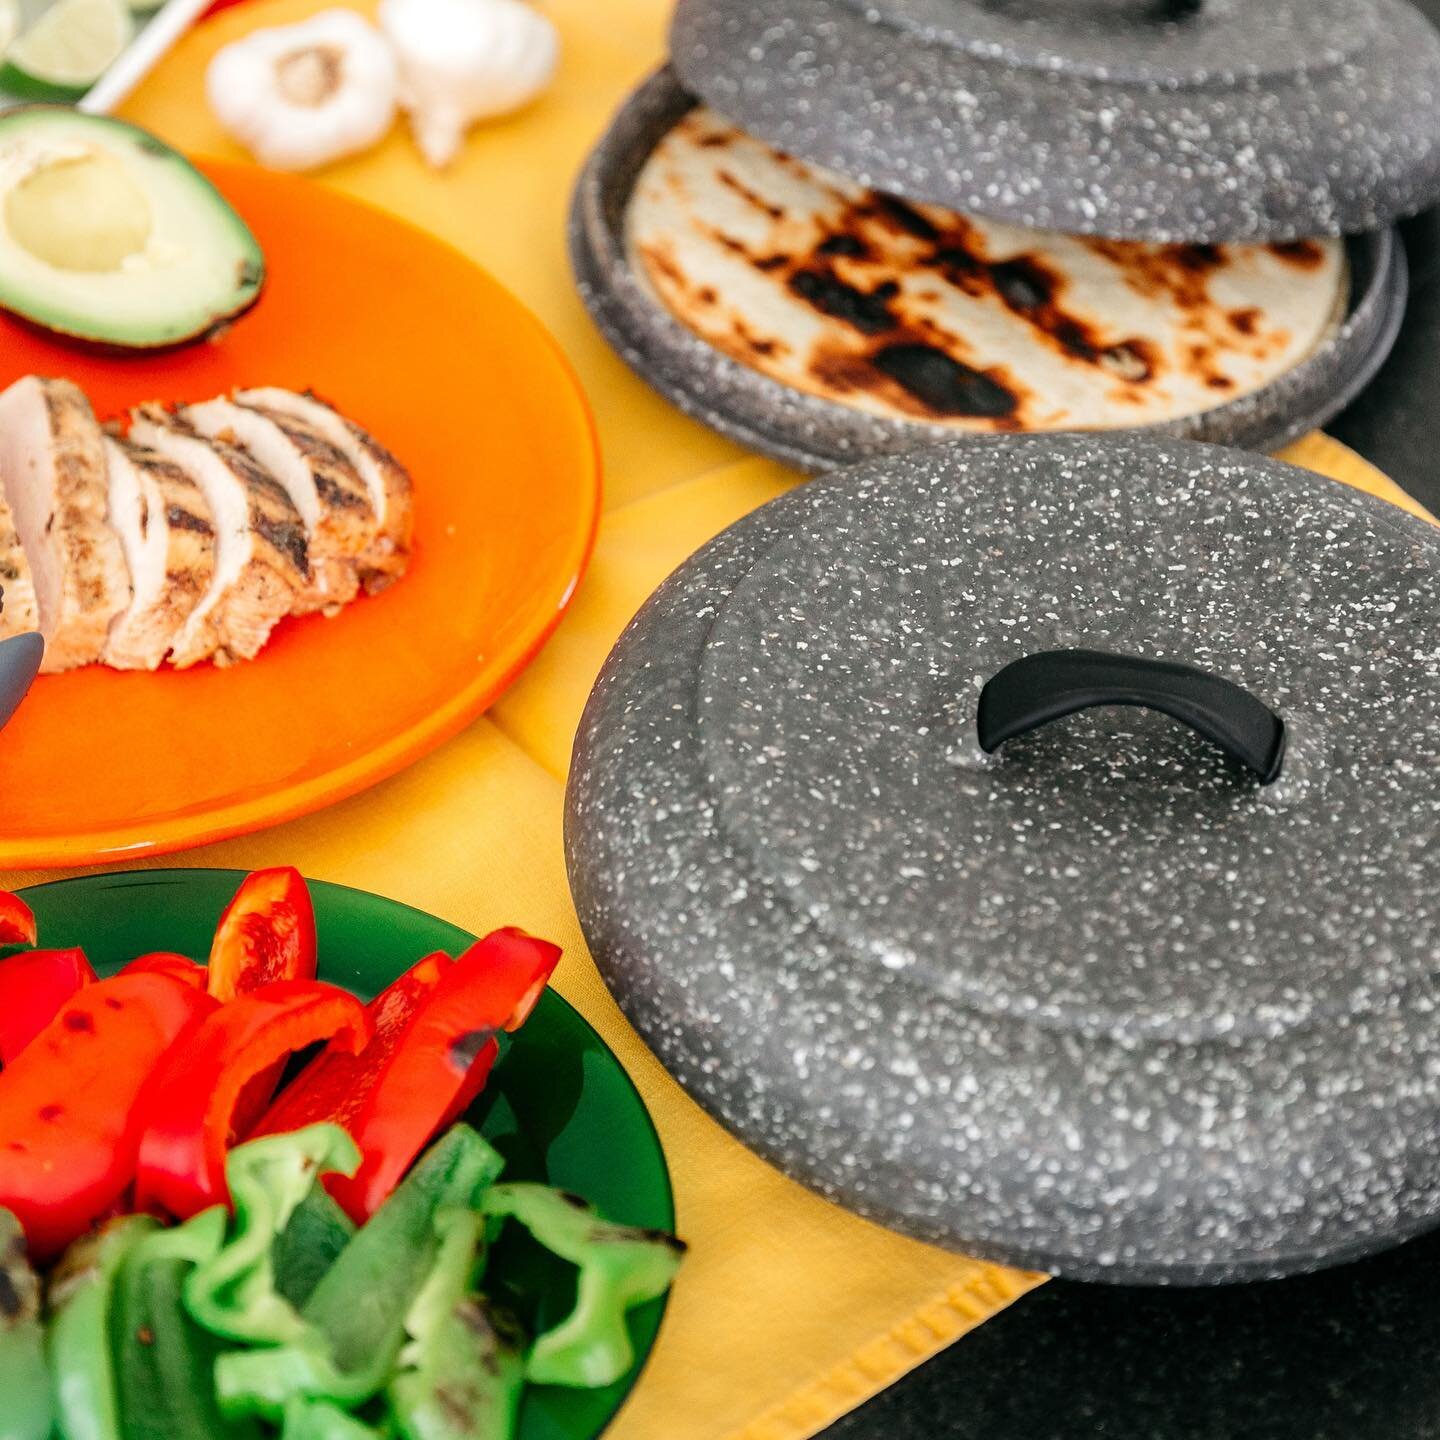 Are you a soft or crispy taco fan? 🌮🫓 Pop those tortillas in this warmer that can go straight into the microwave &amp; then to the dishwasher after dinner! ➡️ Available on @amazon for your next taco or fajita night 🌶
&bull;
#dexas #tortillawarmer 